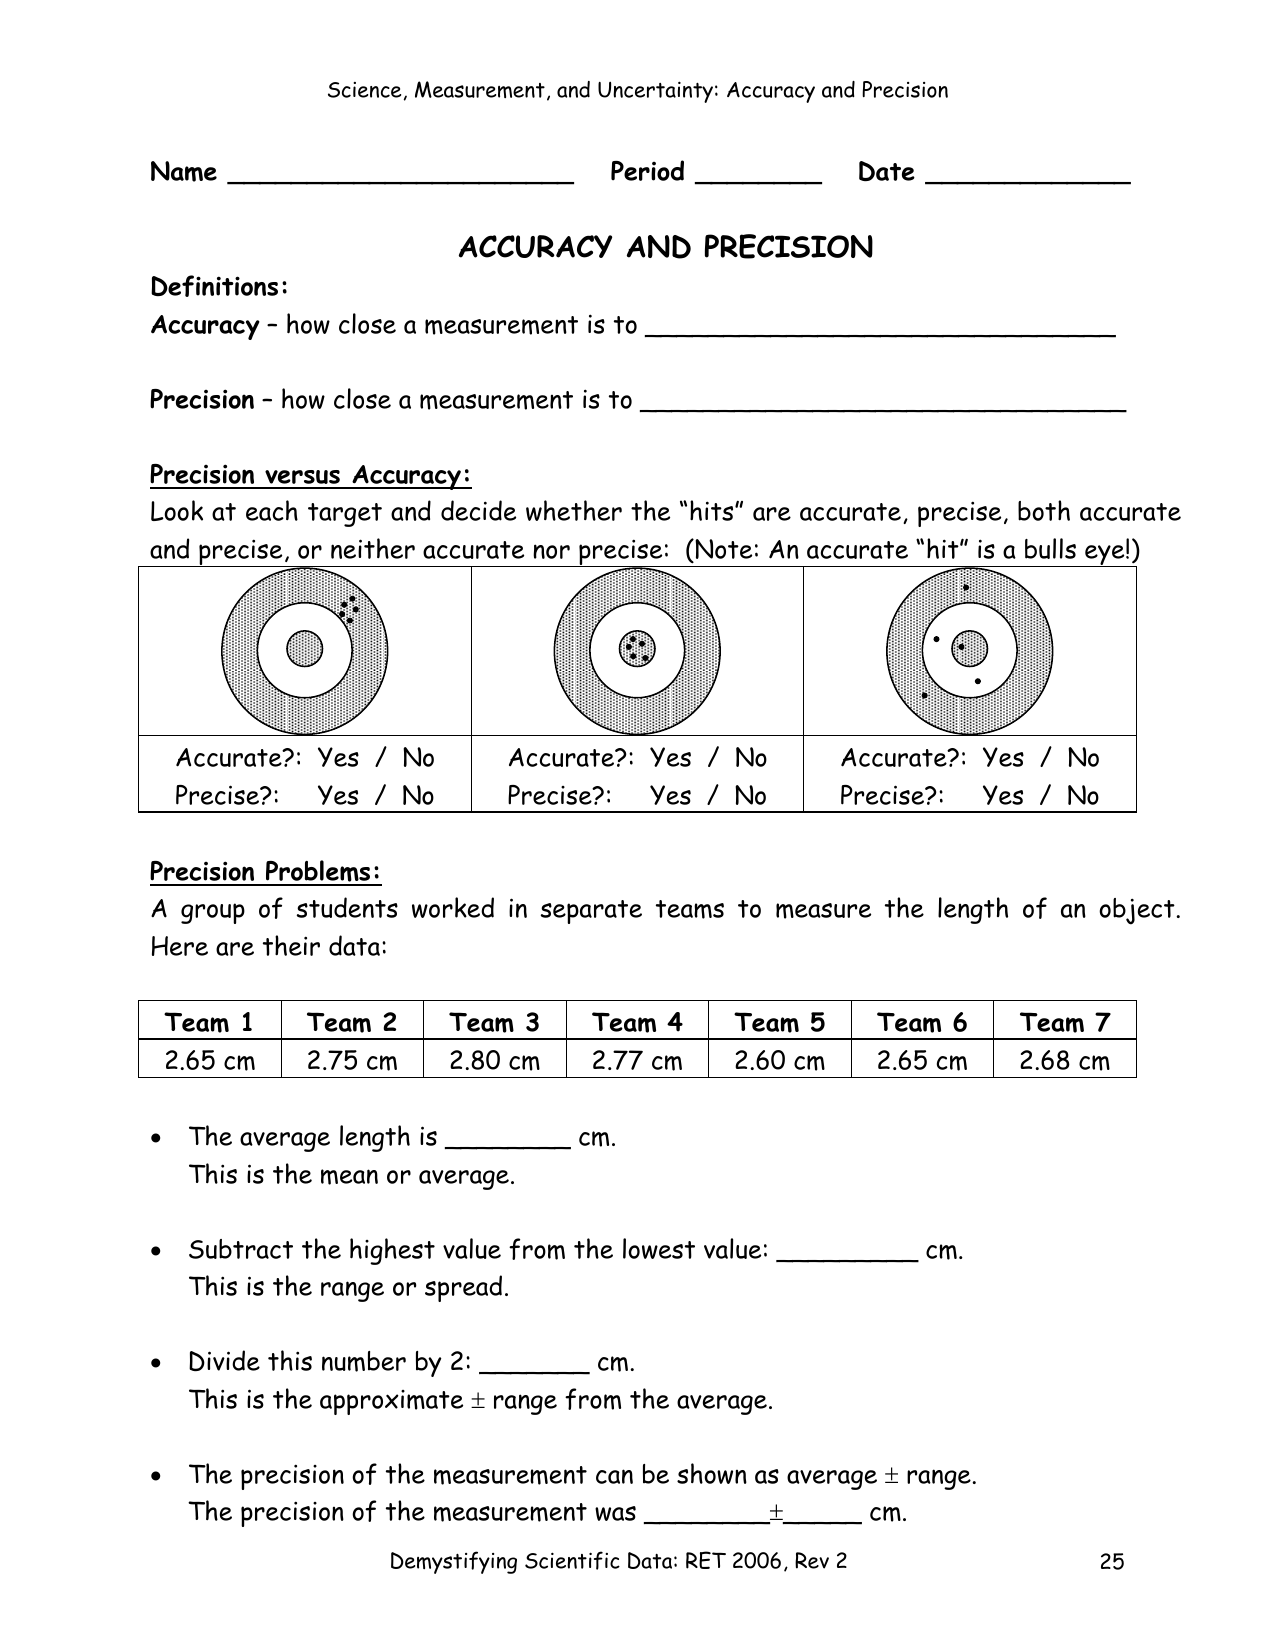 Worksheet-Accuracy and Precision-Final Regarding Accuracy And Precision Worksheet Answers